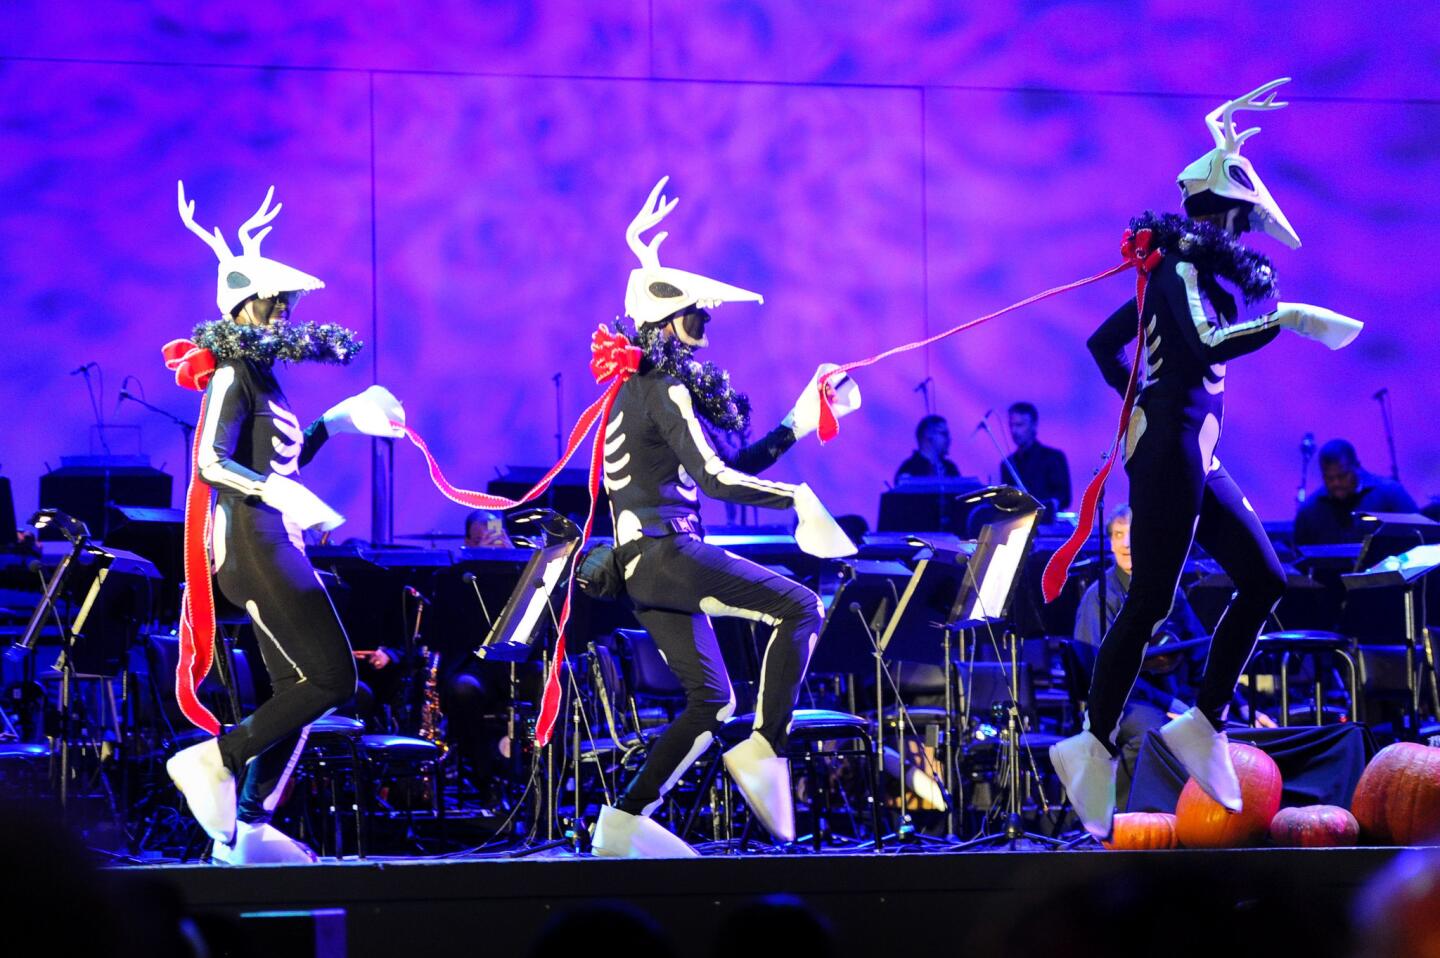 'The Nightmare Before Christmas' at the Hollywood Bowl